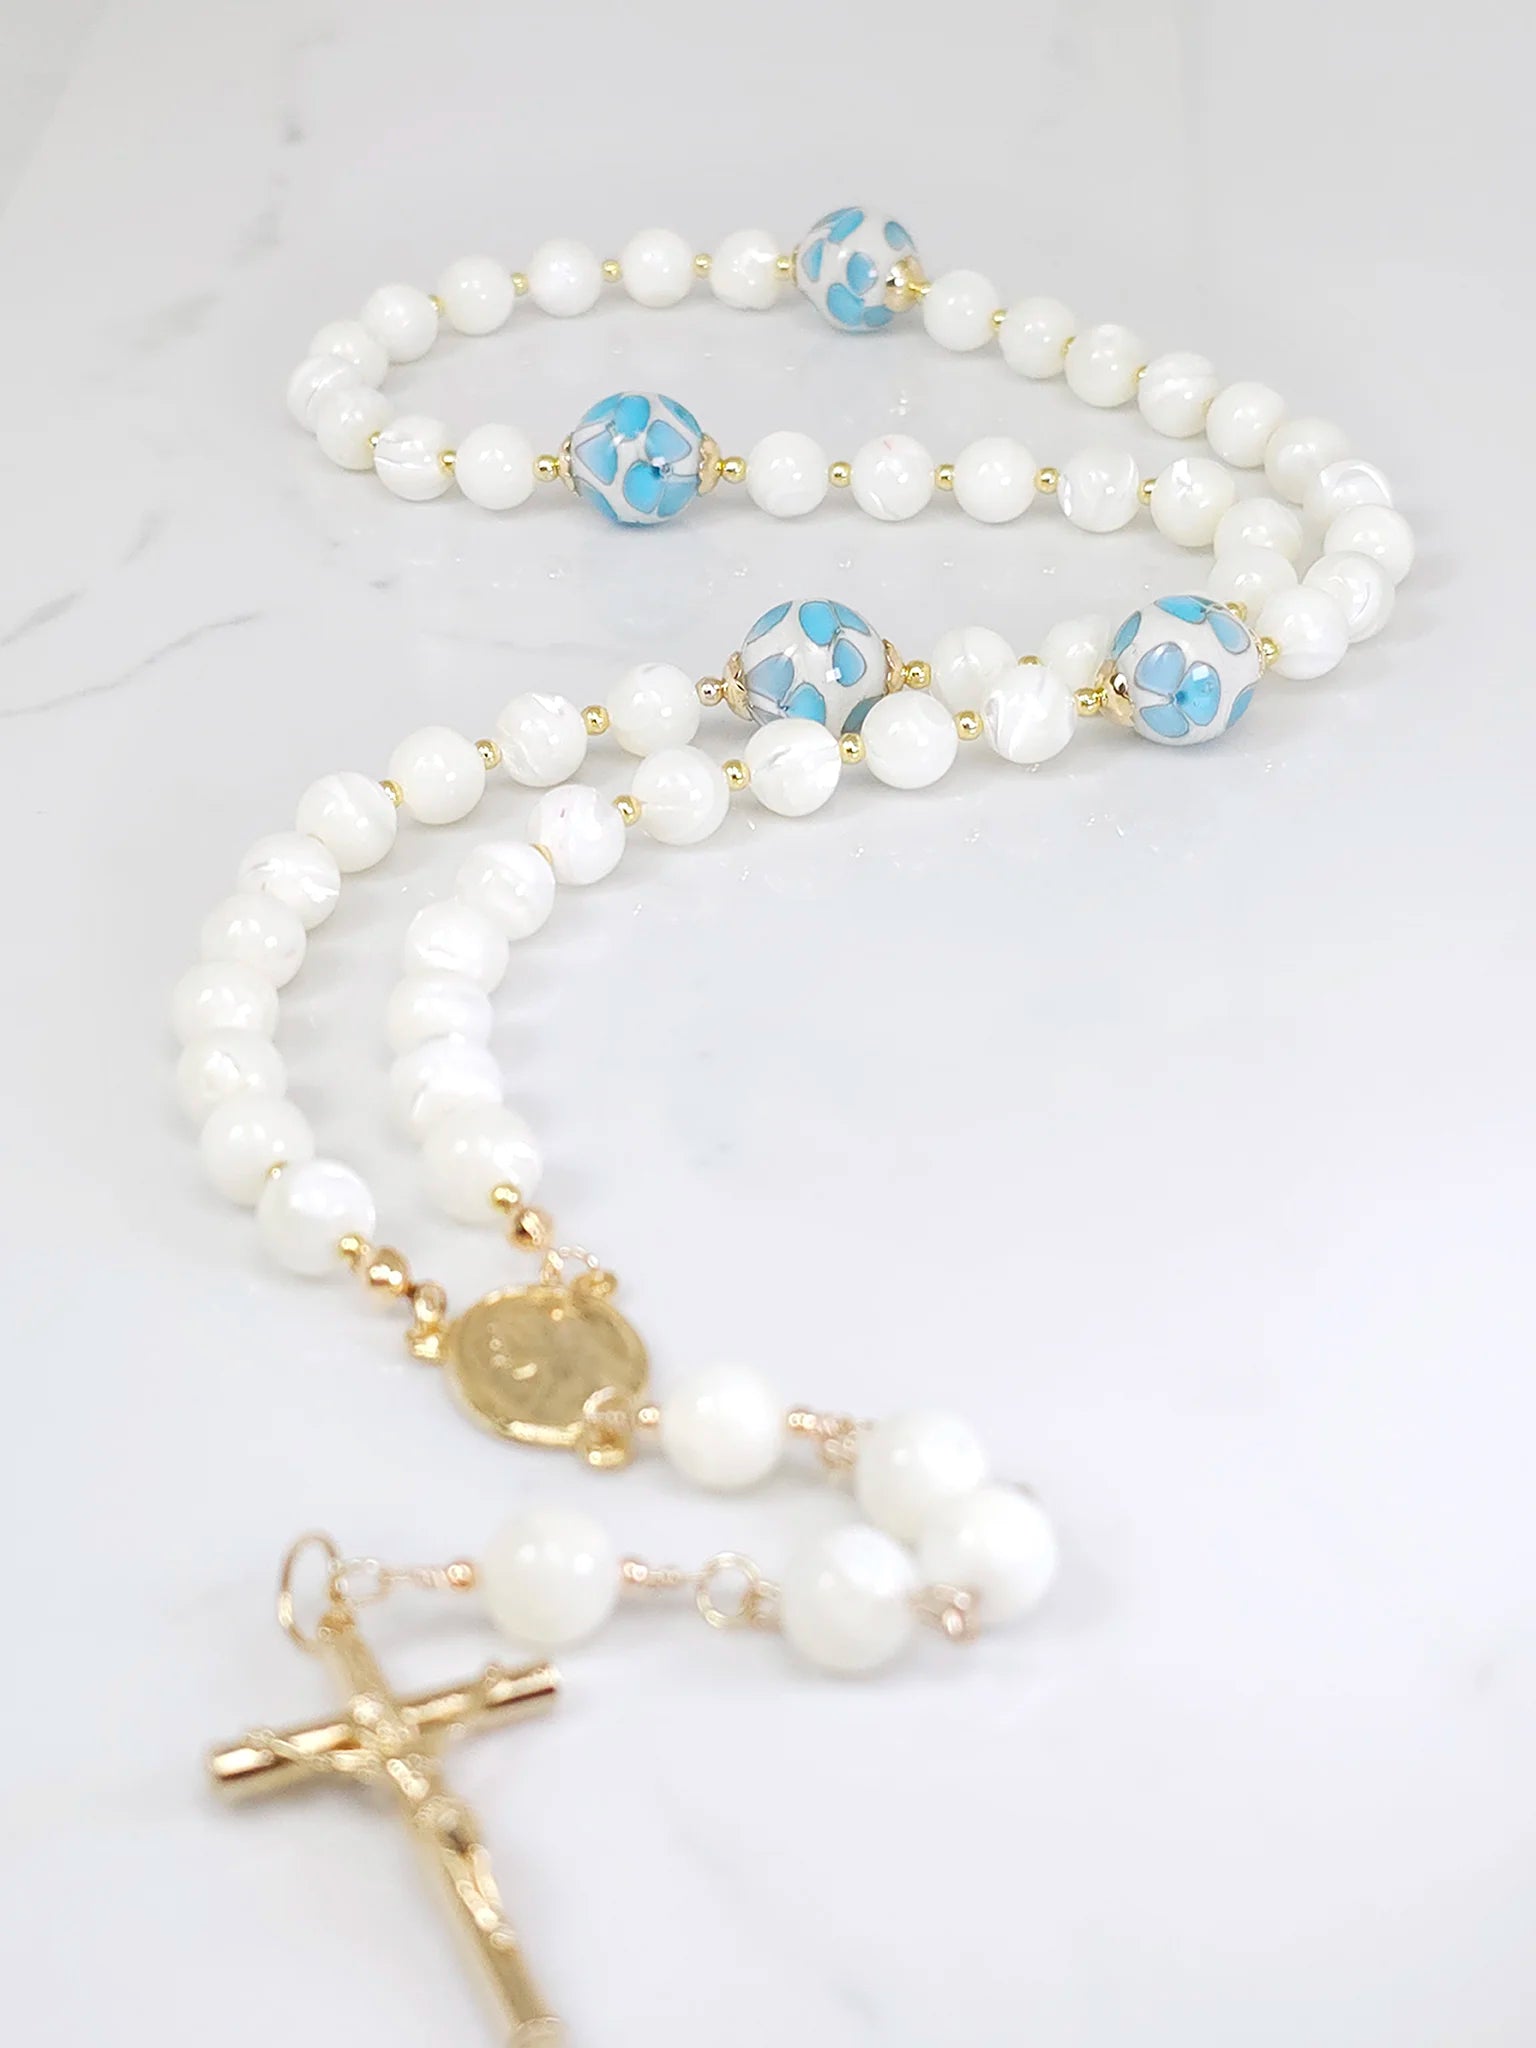 Rosary adorned with little blue flower glass beads, complemented by a Gold-plated Madonna medal centerpiece.